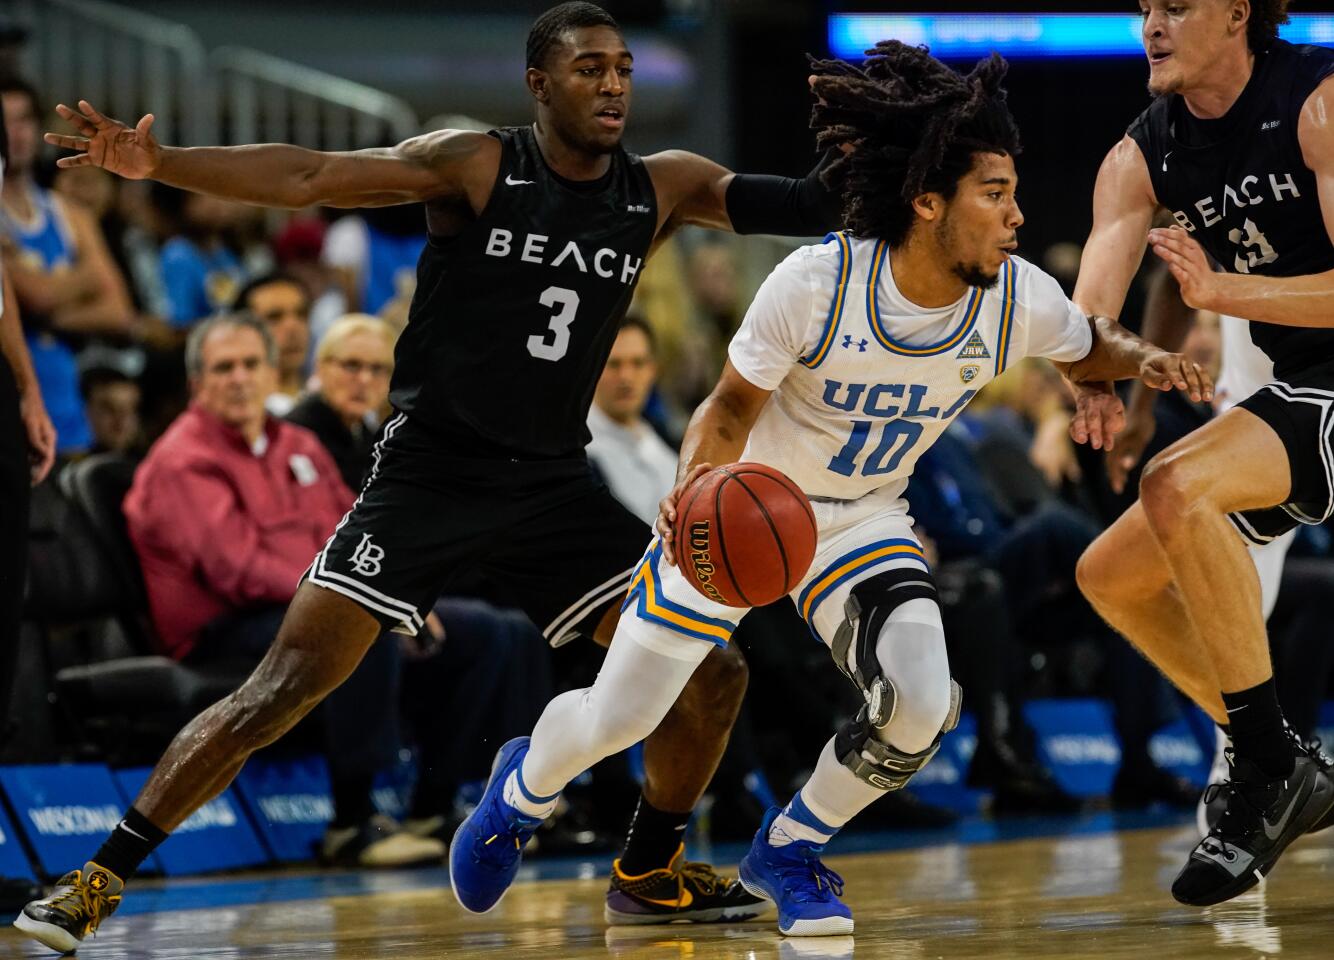 UCLA guard Tyger Campbell (10) dribbles the ball while being defended by Long Beach State guard Drew Cobb (3) and forward Romelle Mansel (13) during the first half of game Nov. 6 at Pauley Pavilion.